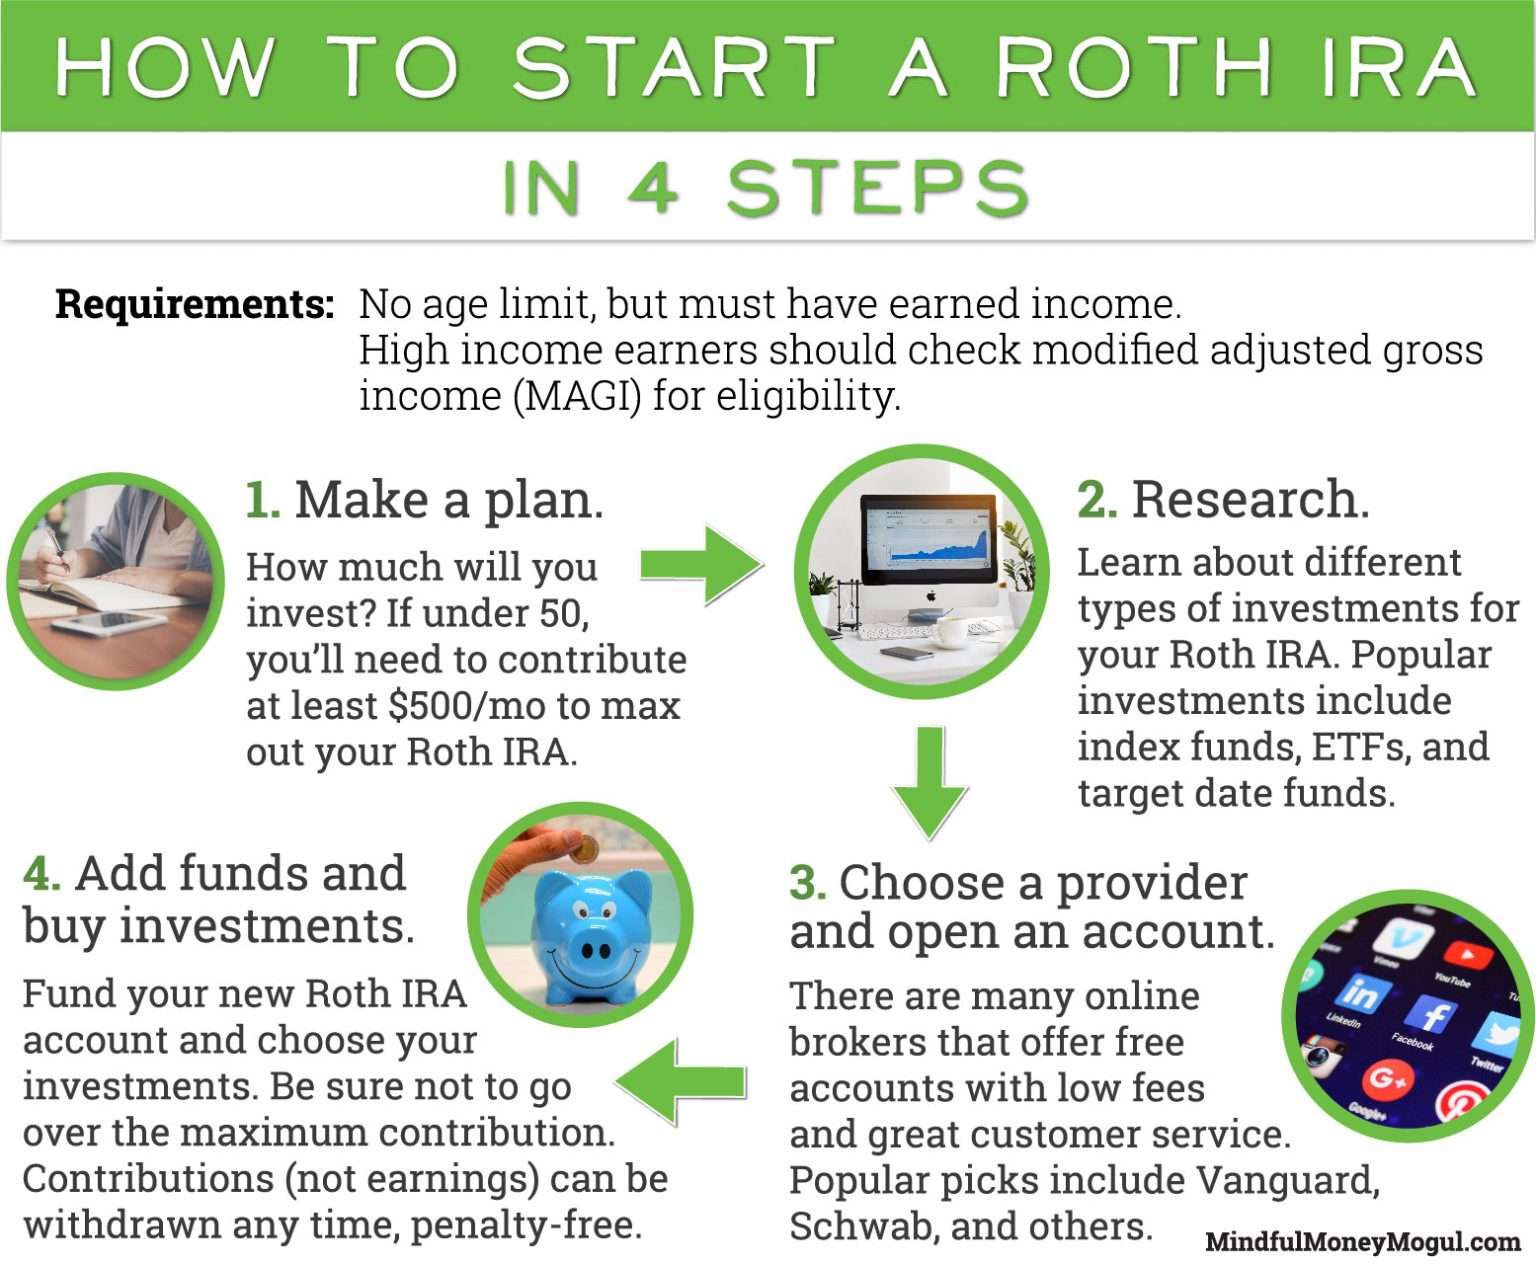 How to Start a Roth IRA in 2020: Roth IRA Guide to Save ...